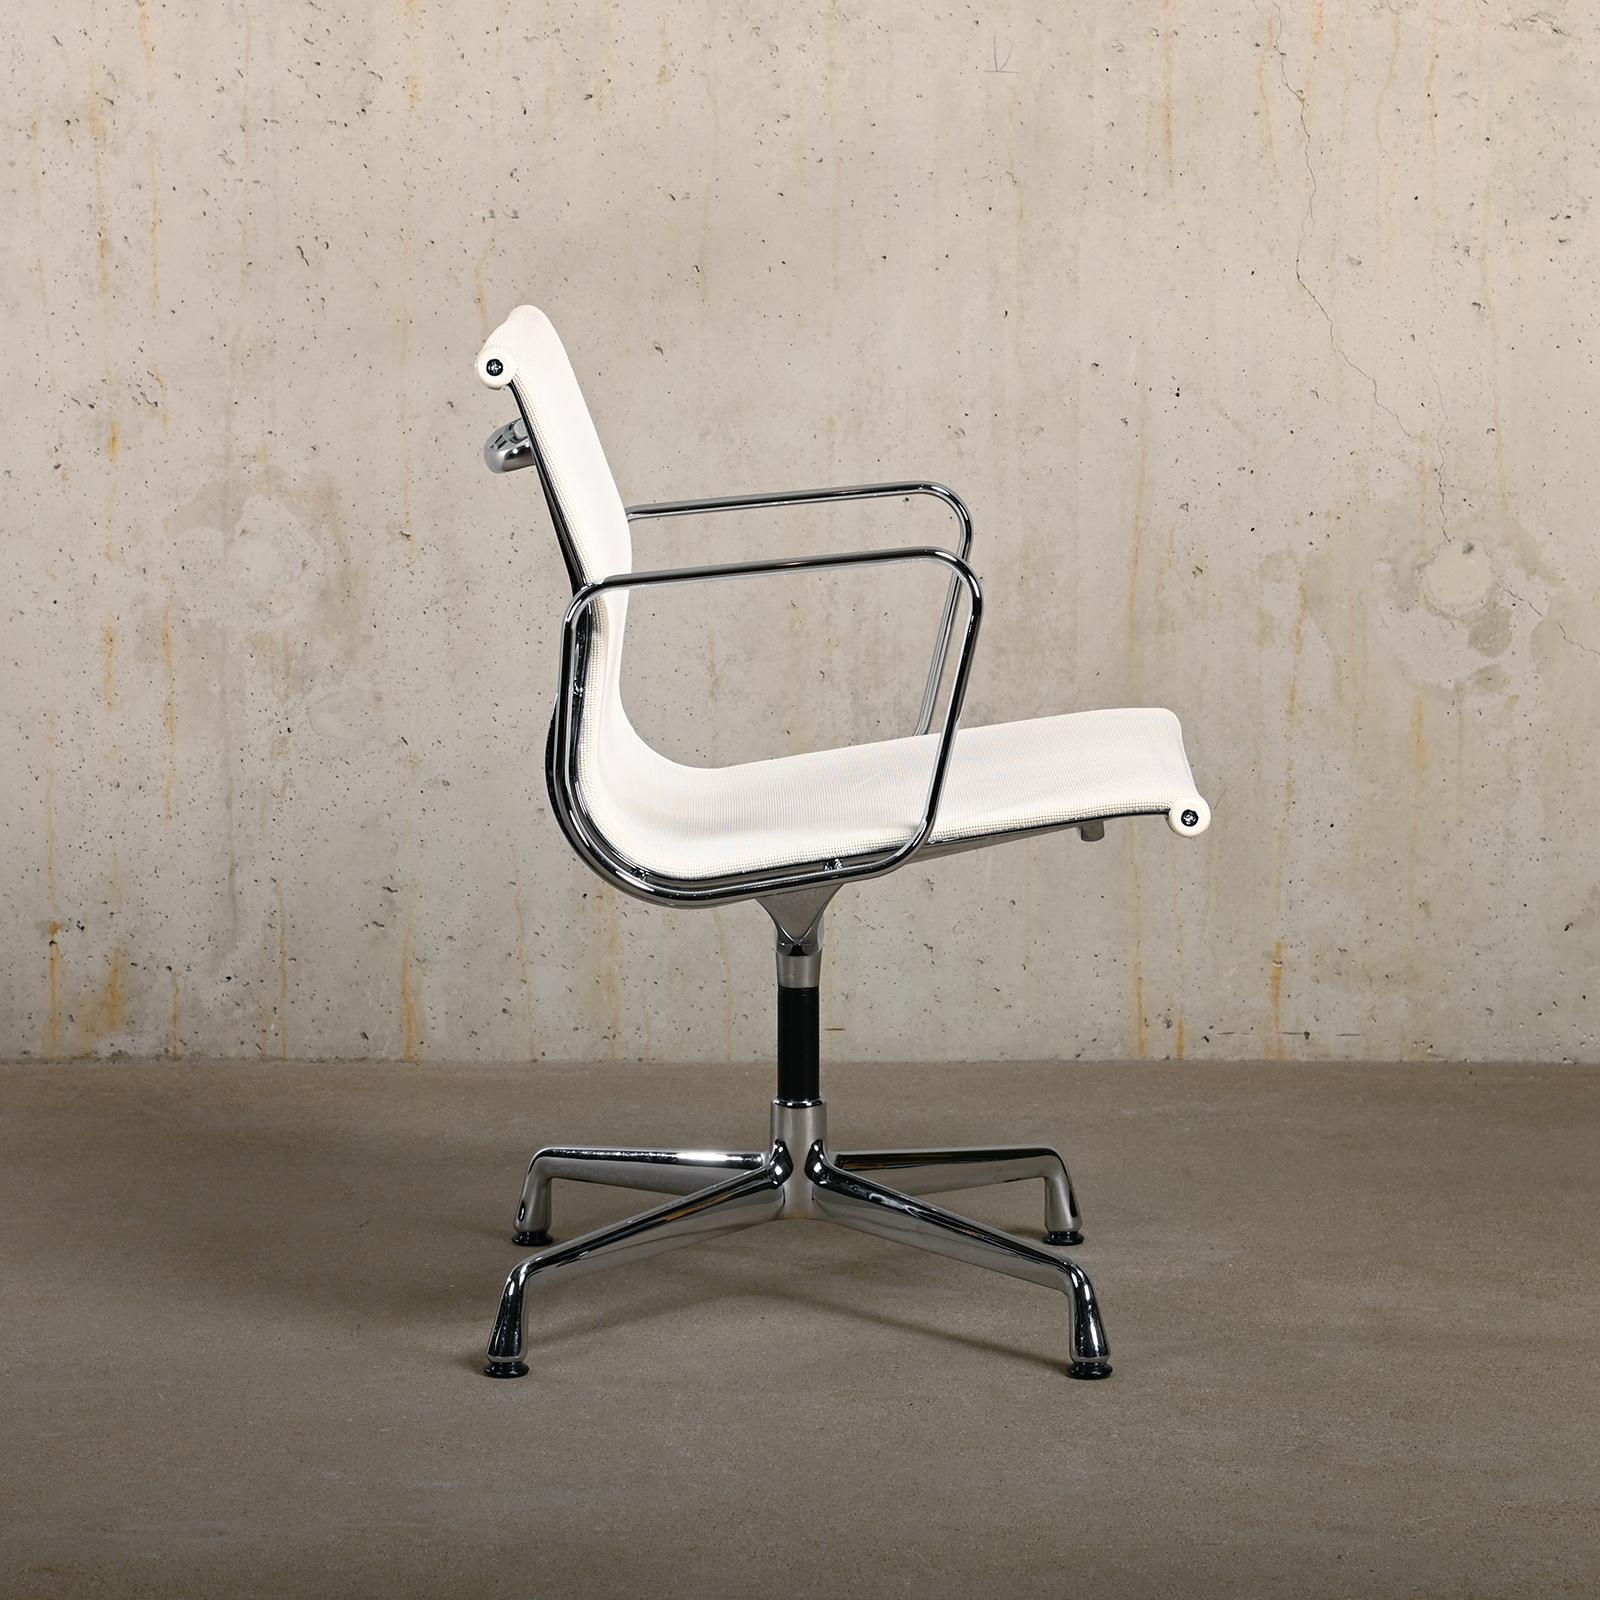 German Multiple Eames Aluminum Group EA108 Dining Chairs in White Netweave Mesh, Vitra For Sale